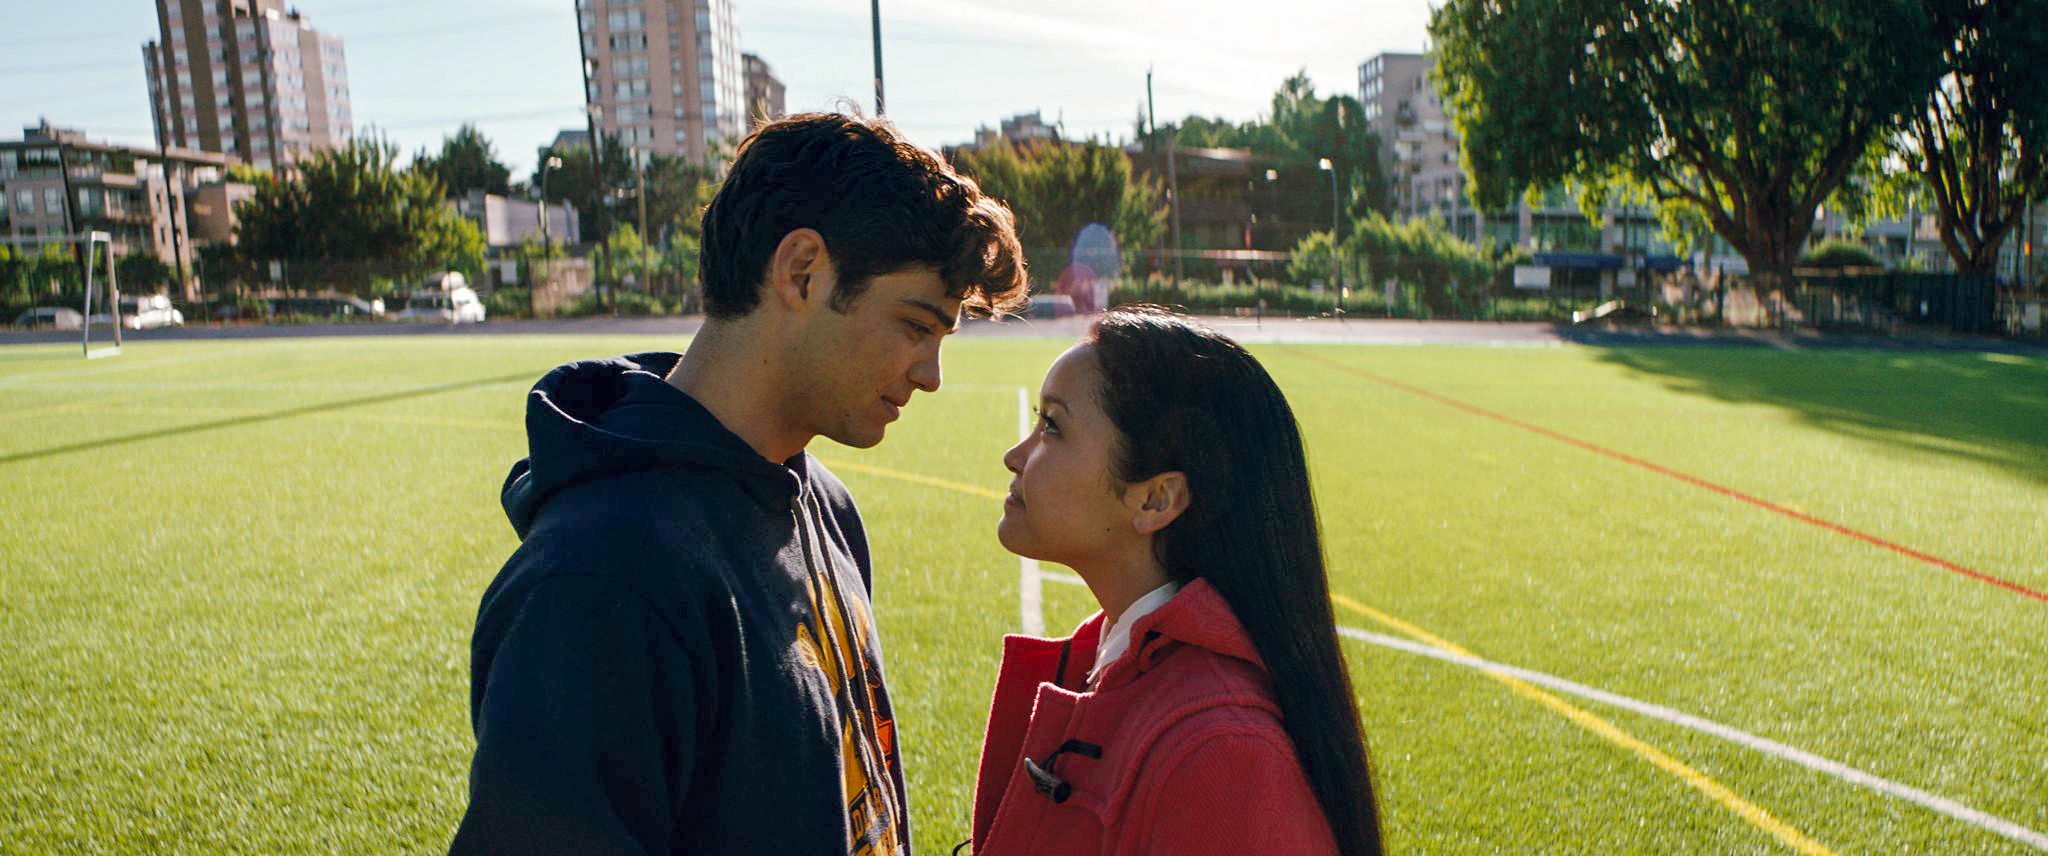 Noah Centineo and Lana Condor in To All the Boys I've Loved Before, one of the best Netflix movies